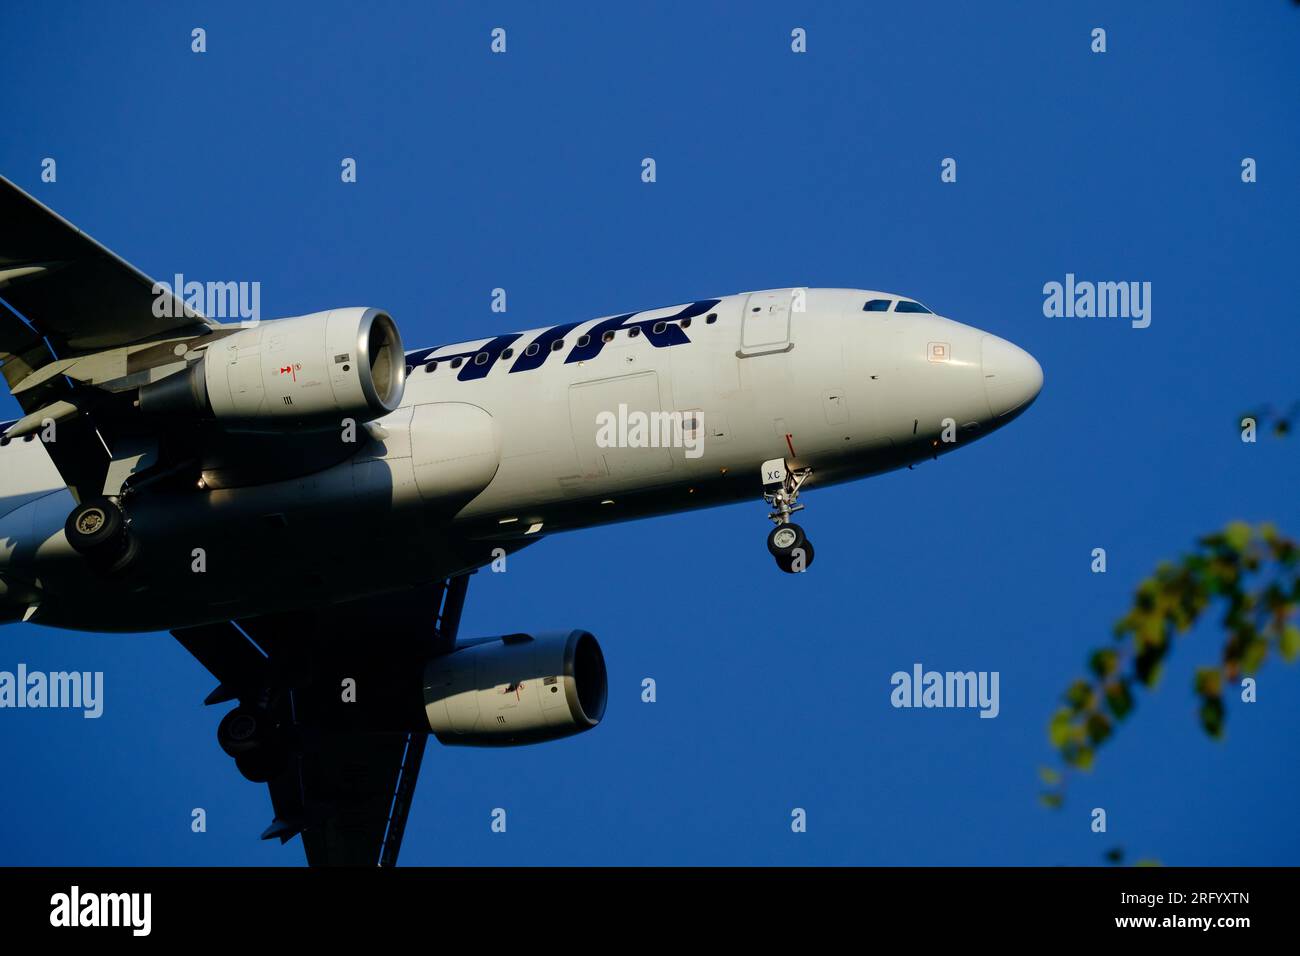 Helsinki / Finland - AUGUST 5, 2023:Airbus A320, operated by Finnair, approaching the airport during sunset. Stock Photo